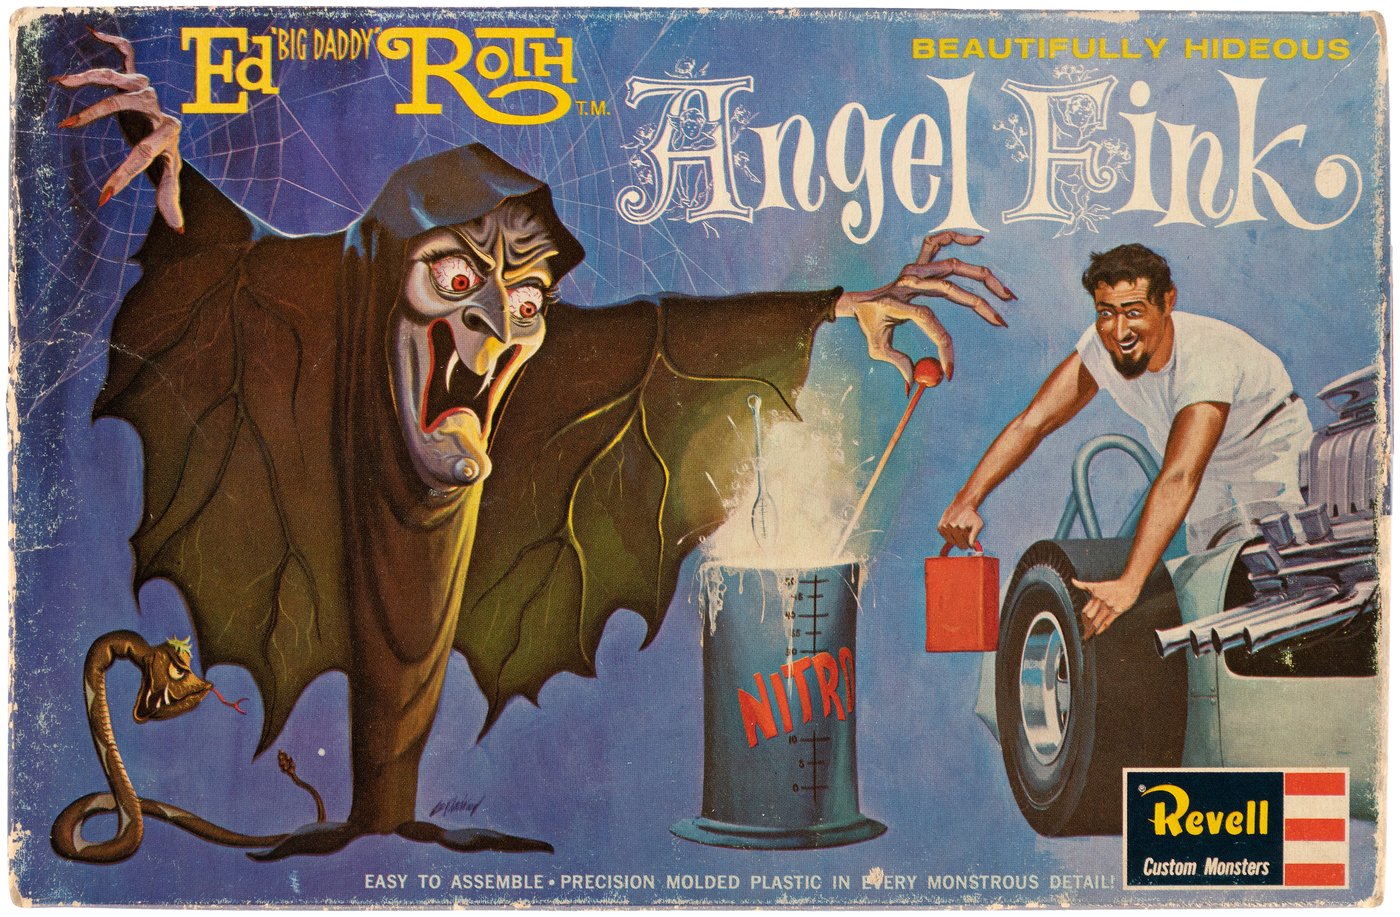 ED ROTH ANGEL FINK MODEL KIT MADE BY REVELL IN 1997 